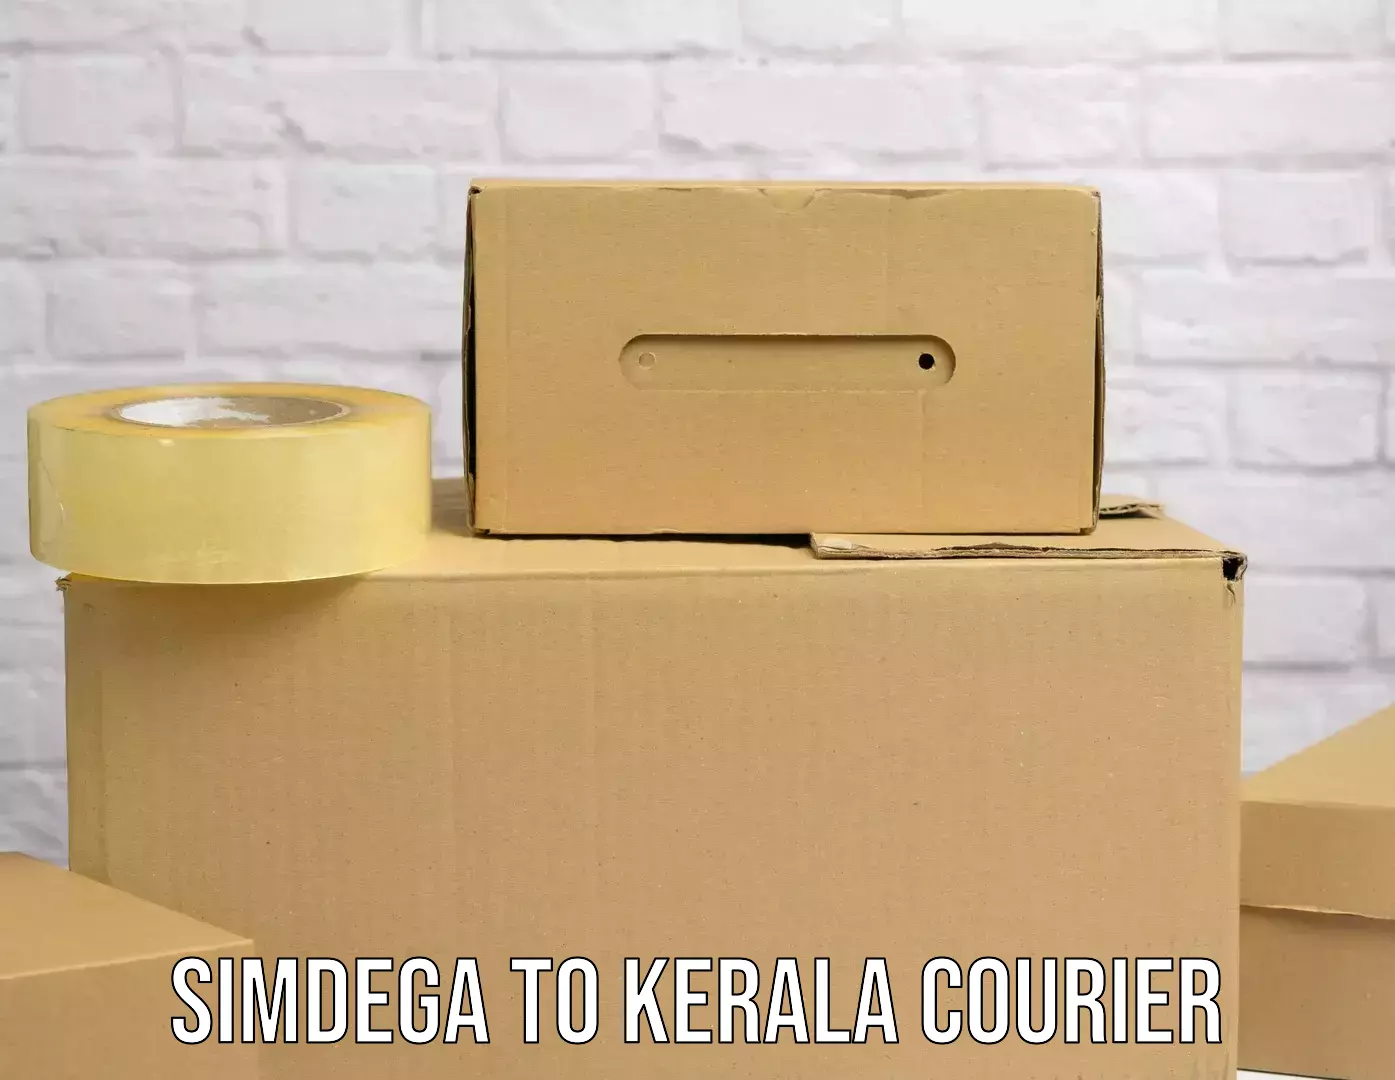 Full-service courier options Simdega to Adoor